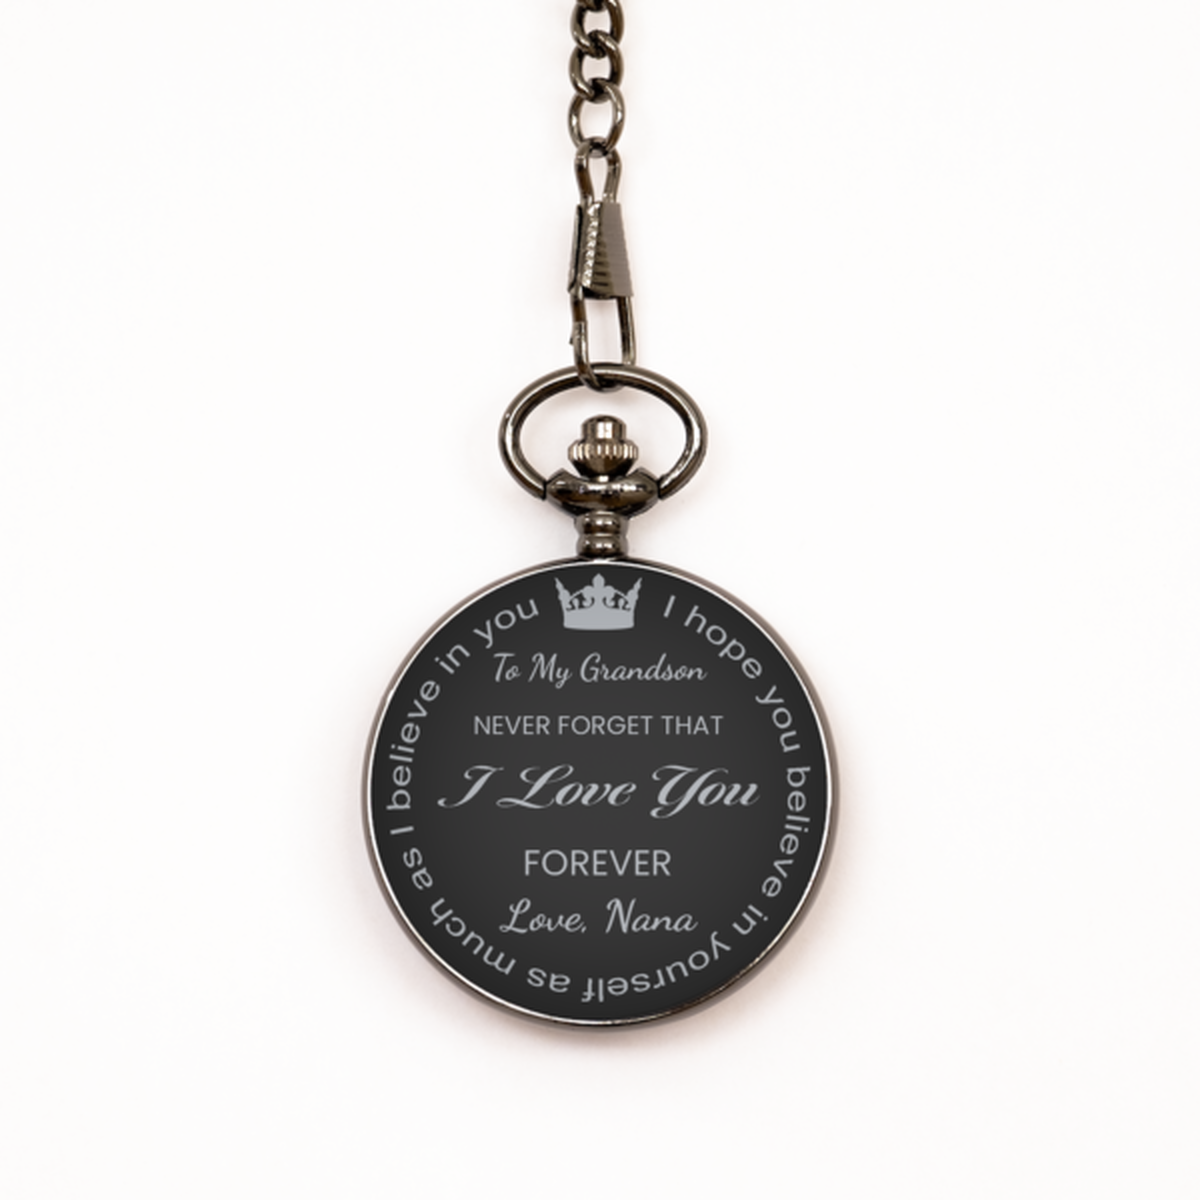 To My Grandson Pocket Watch from Nana, Gift for Grandson, Black Engraved Pocket Watch, Believe in You, Birthday, Christmas Gift.